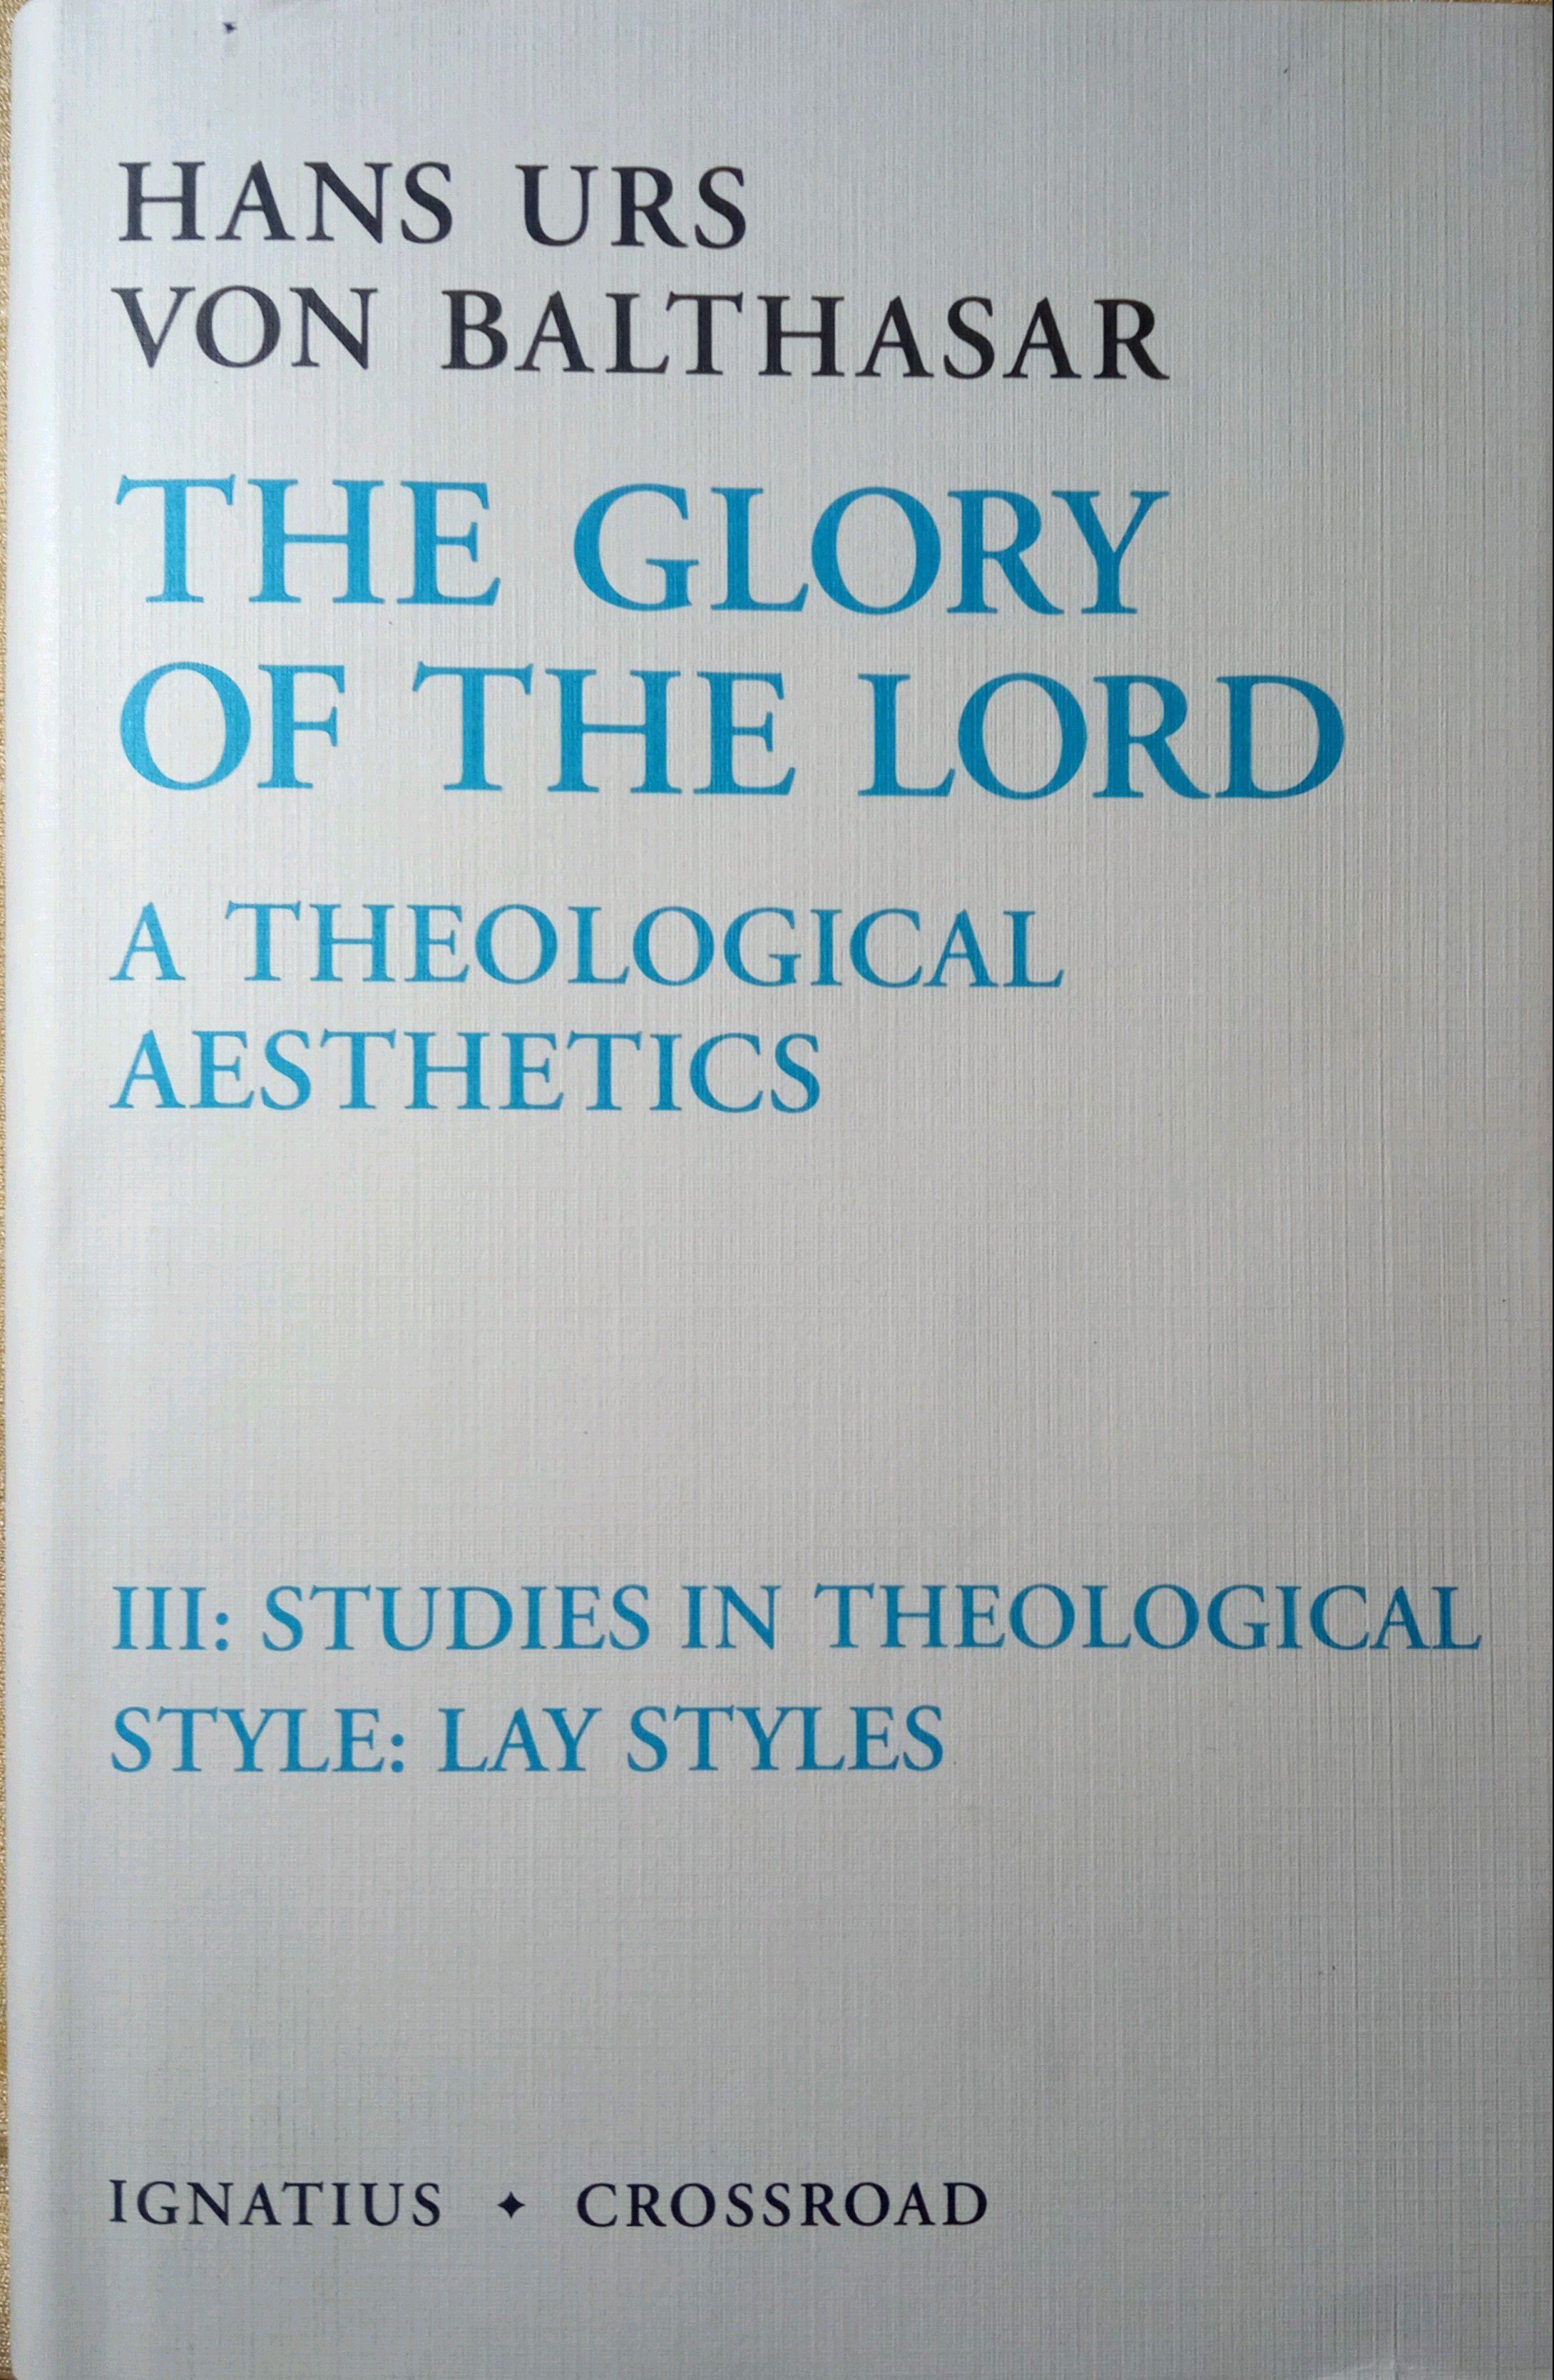 THE GLORY OF THE LORD: A THEOLOGICAL AESTHETICS. STUDIES IN THEOLOGICAL STYLE: LAY STYLES